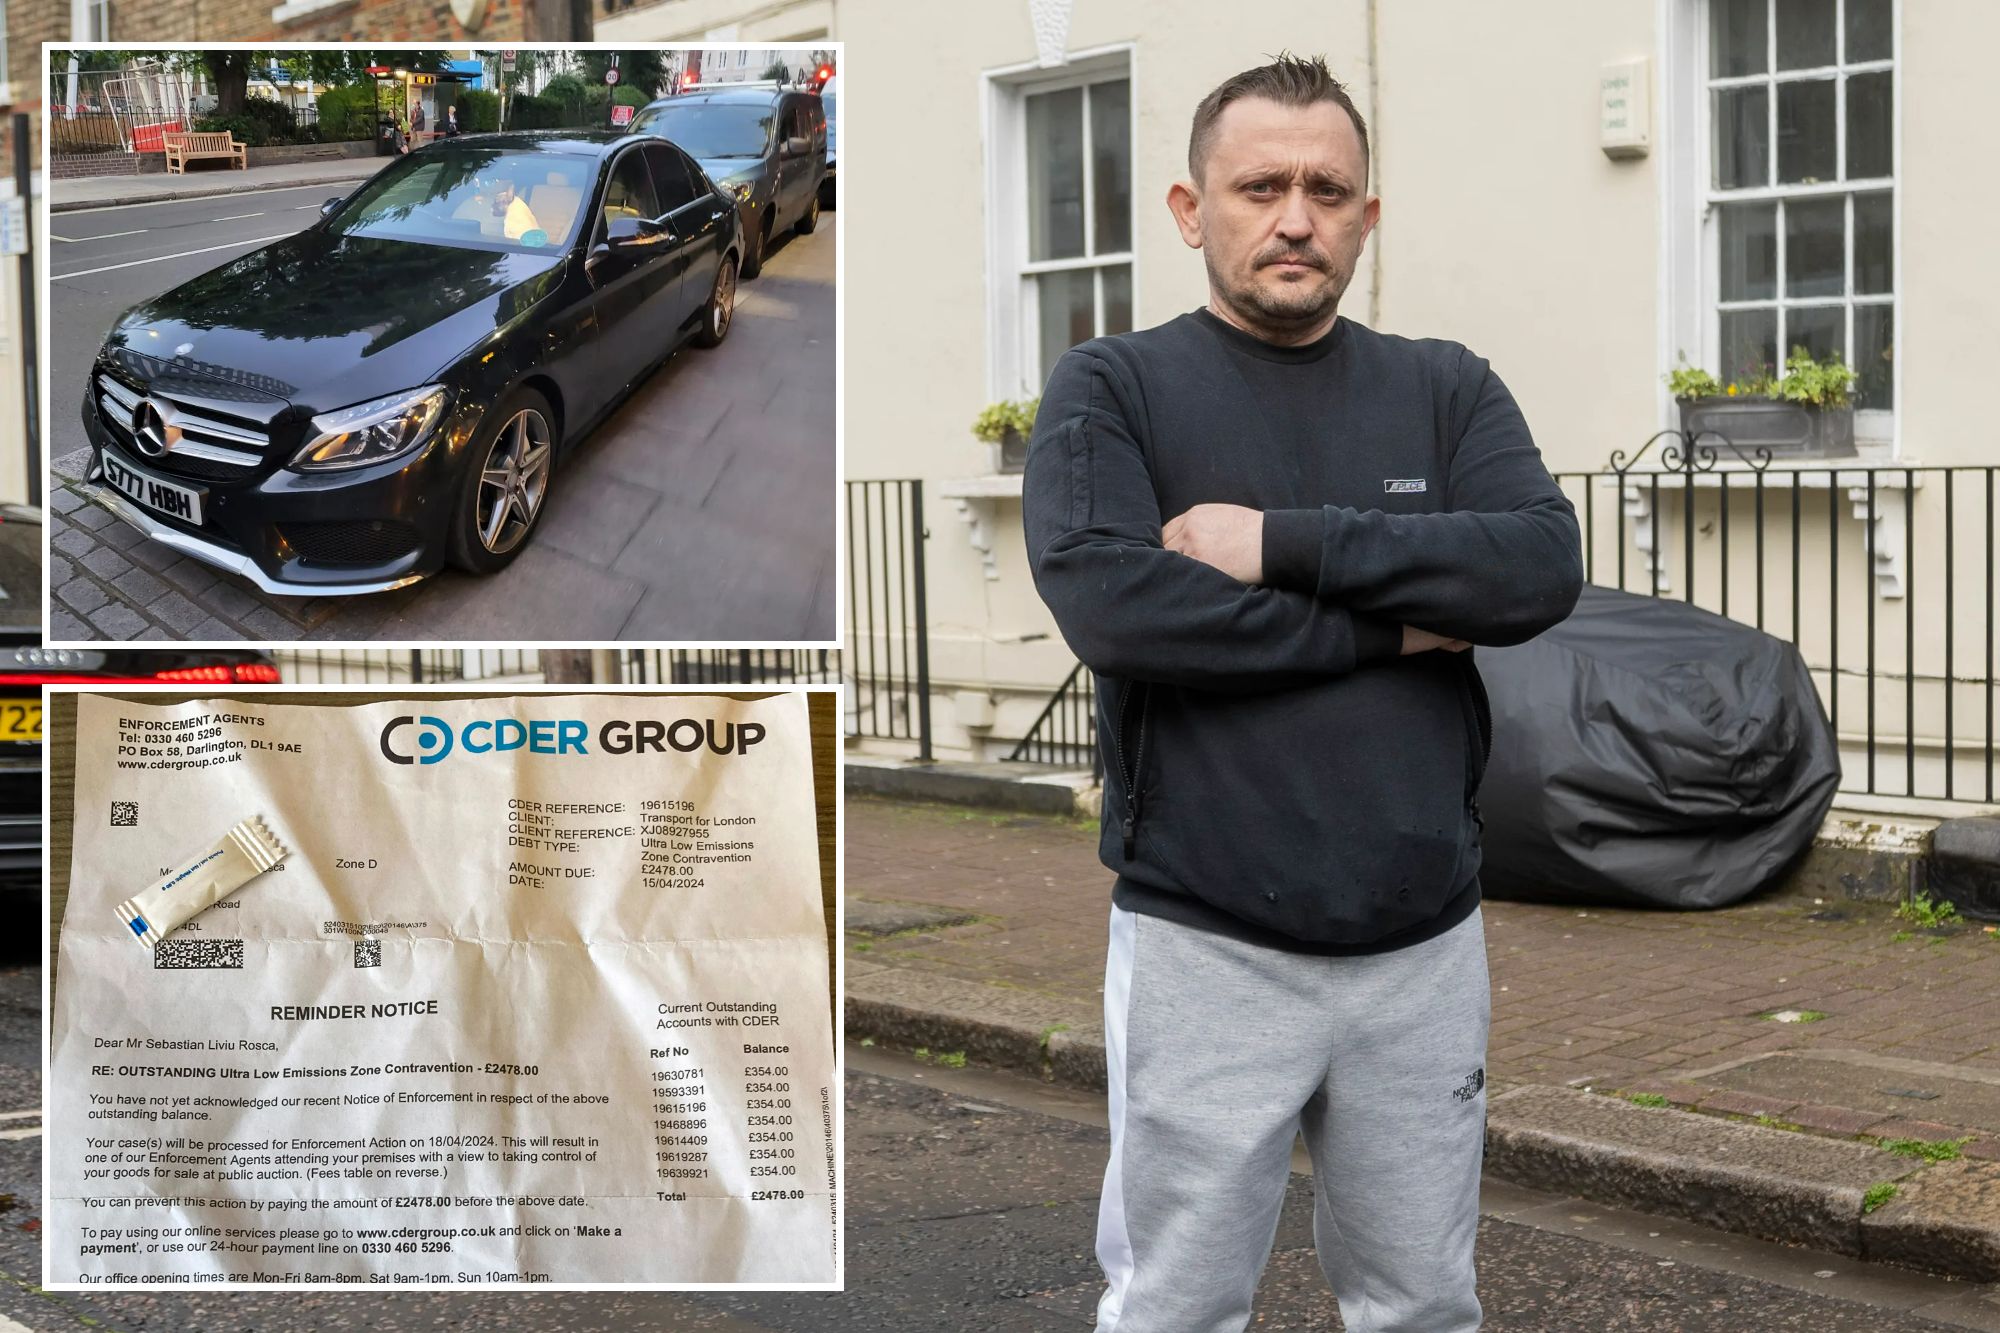 My Merc was taken away & I was fined £2,500 even though I did NOTHING wrong